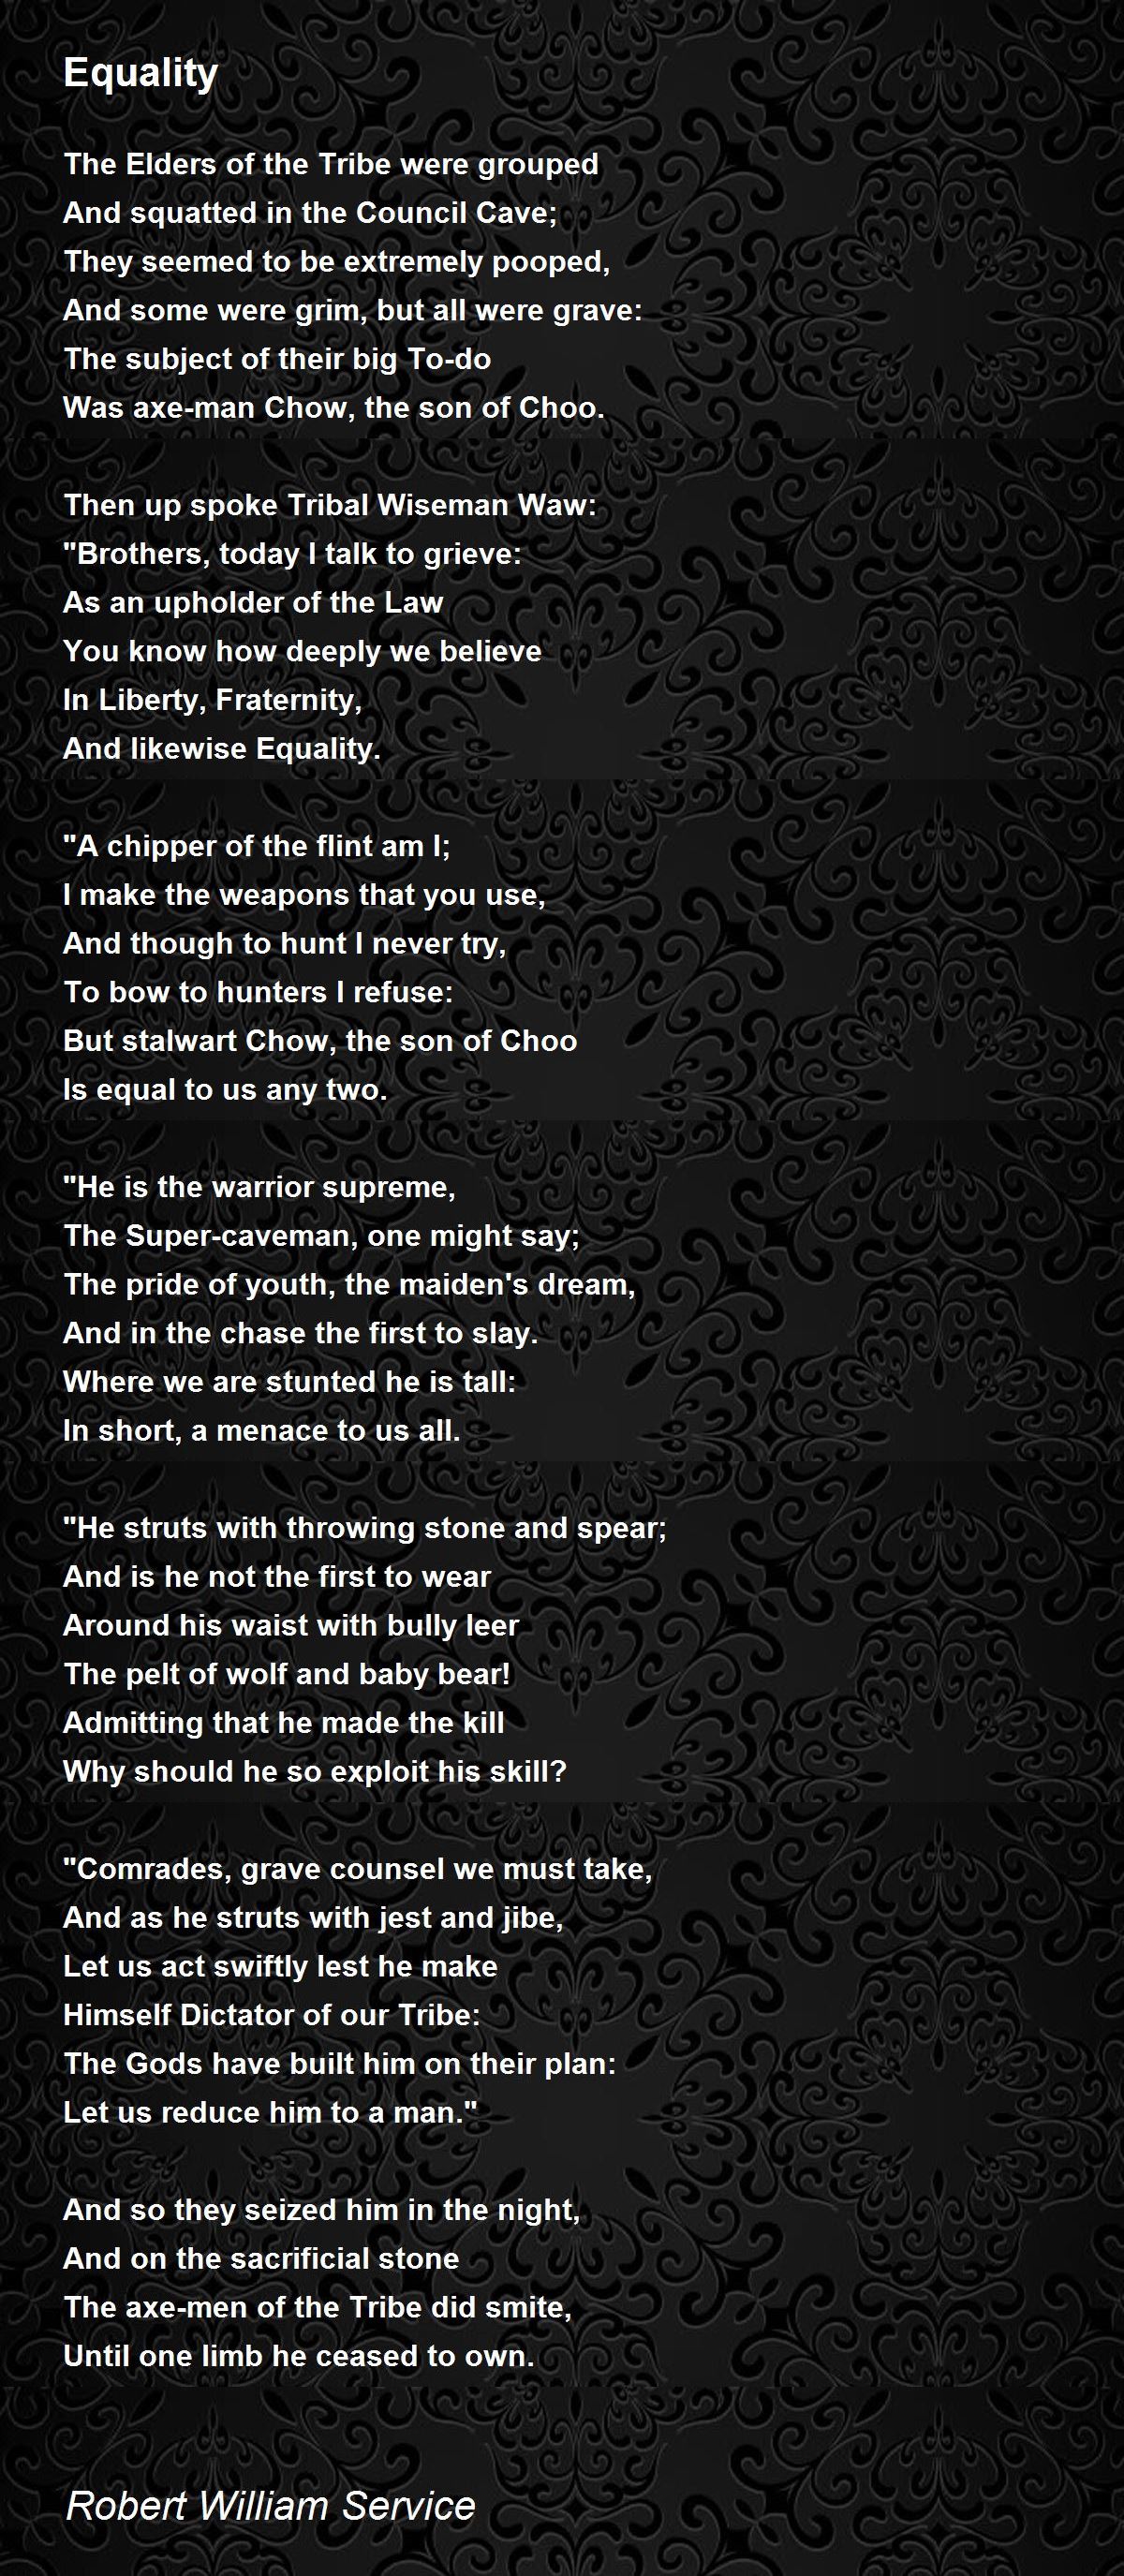 critical essay of the poem equality